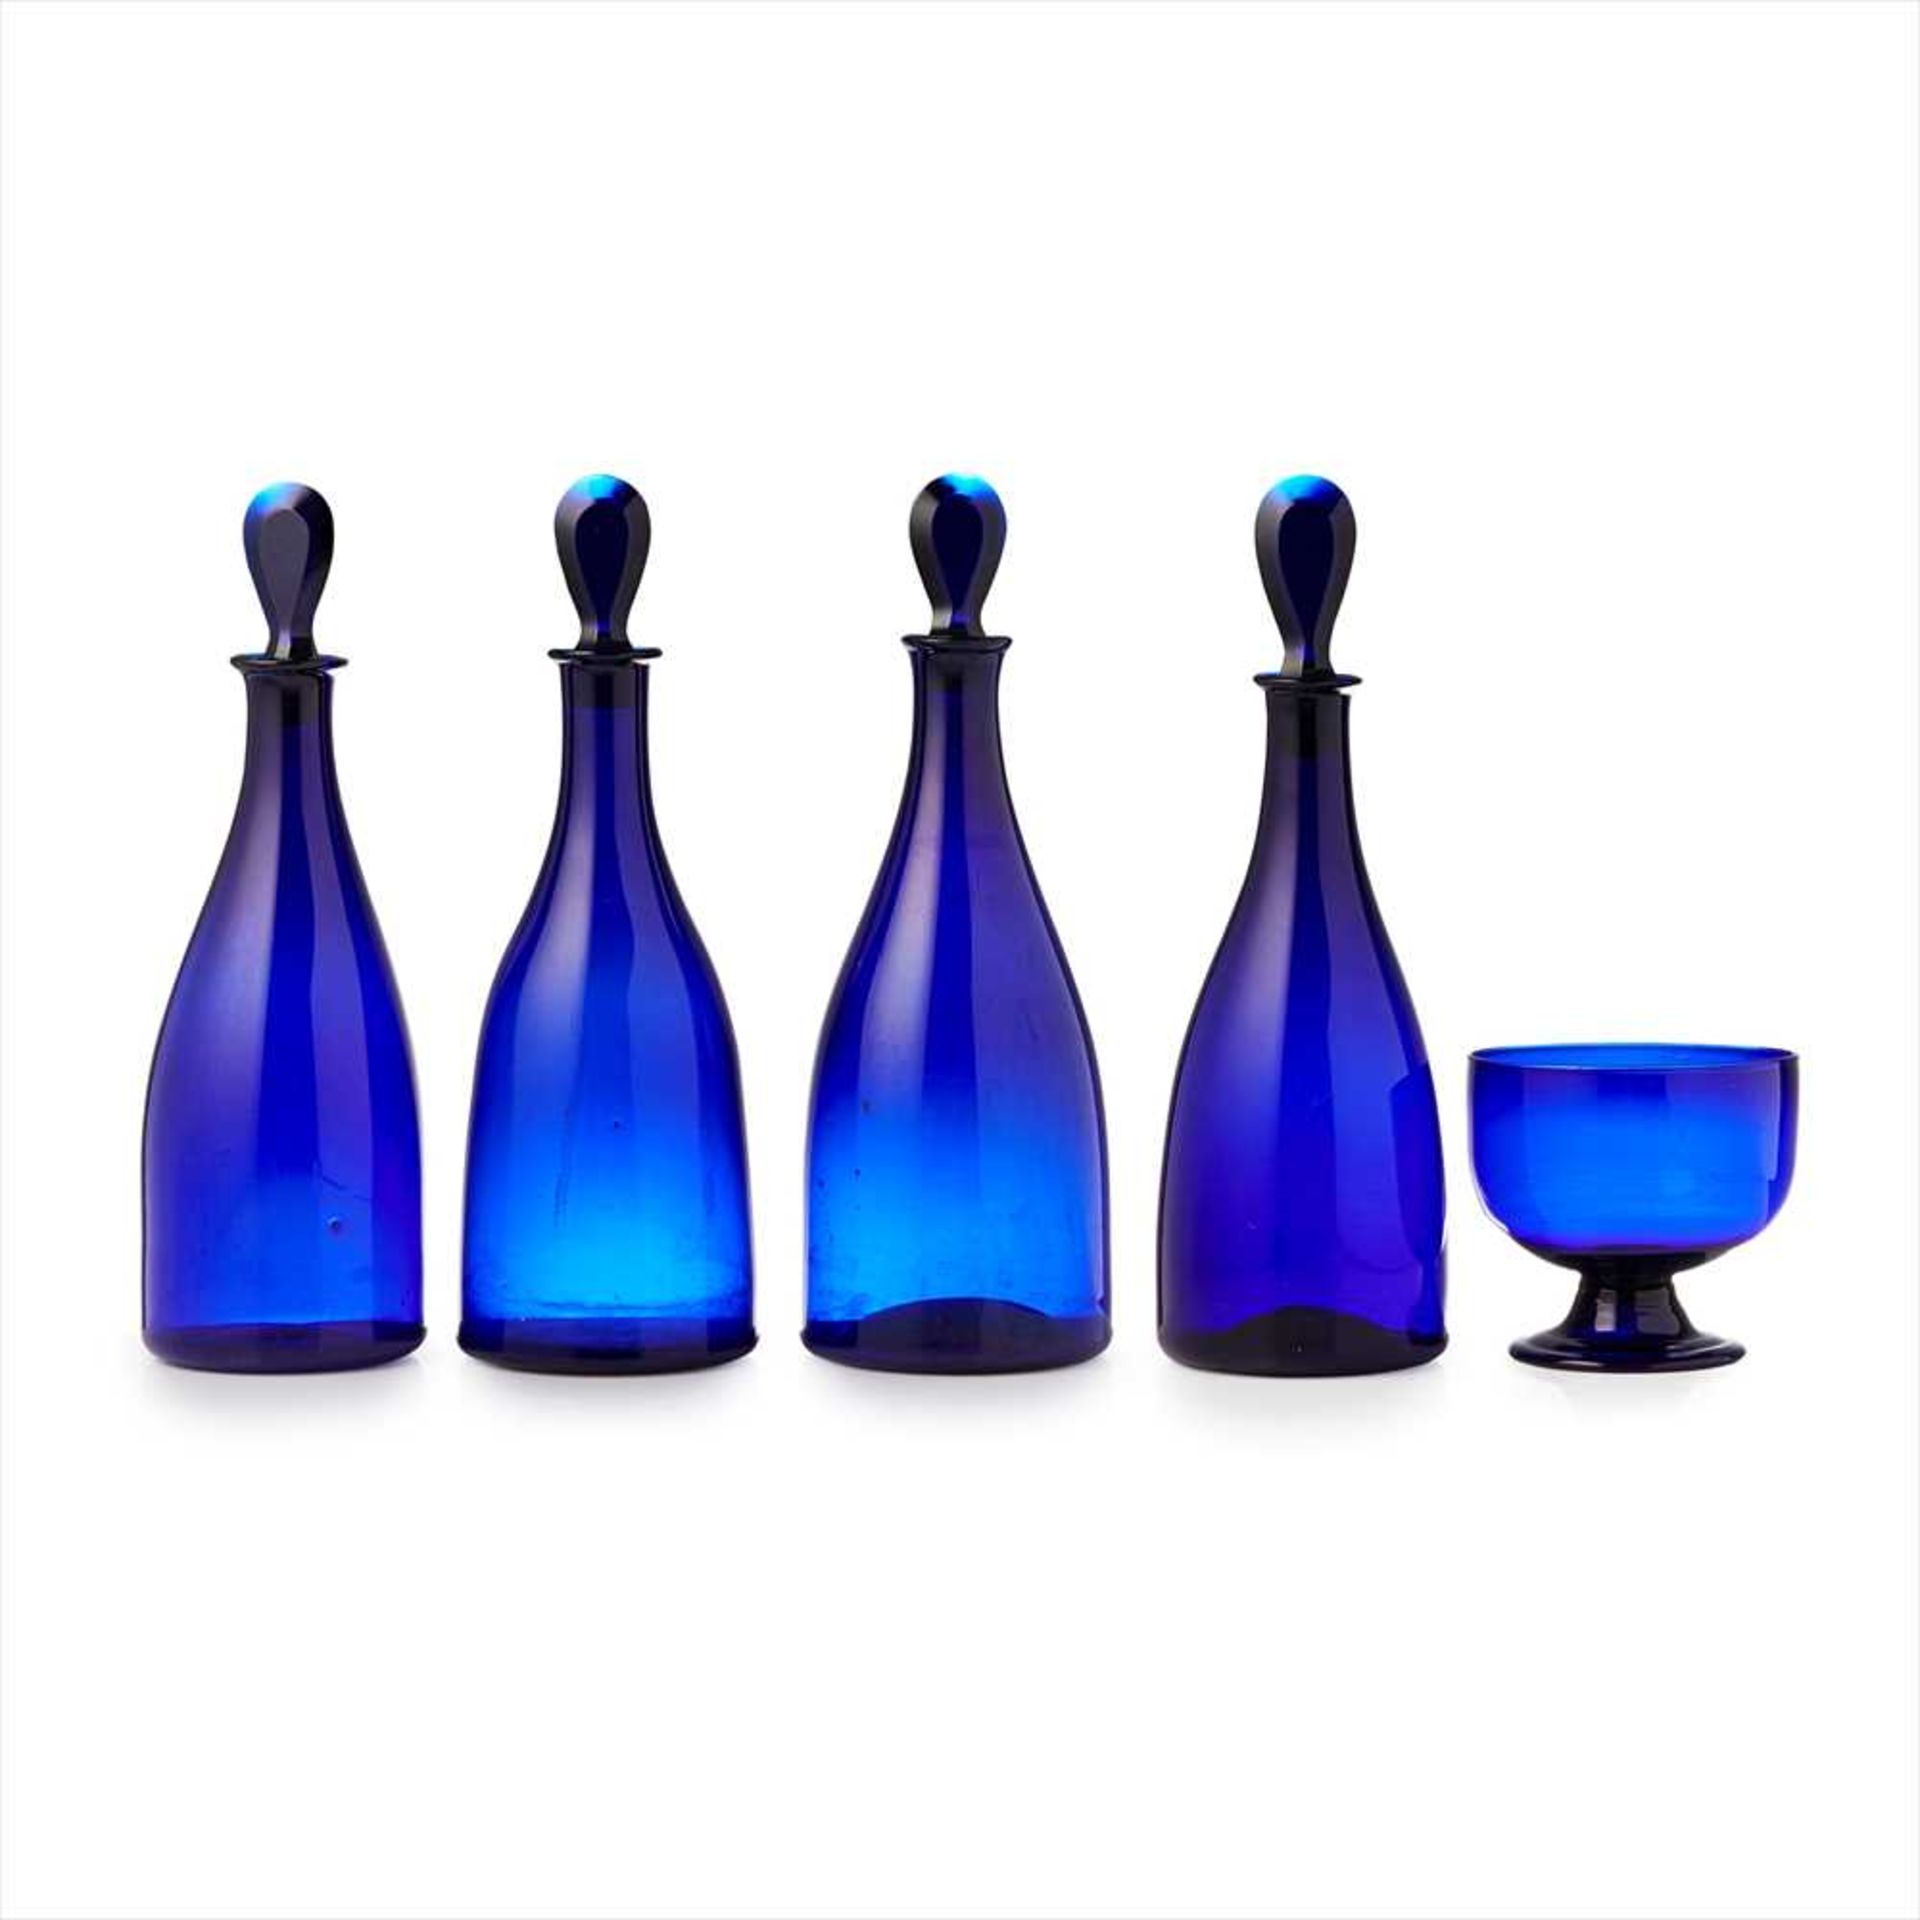 GROUP OF BRISTOL BLUE GLASS LATE 18TH/ EARLY 19TH CENTURY